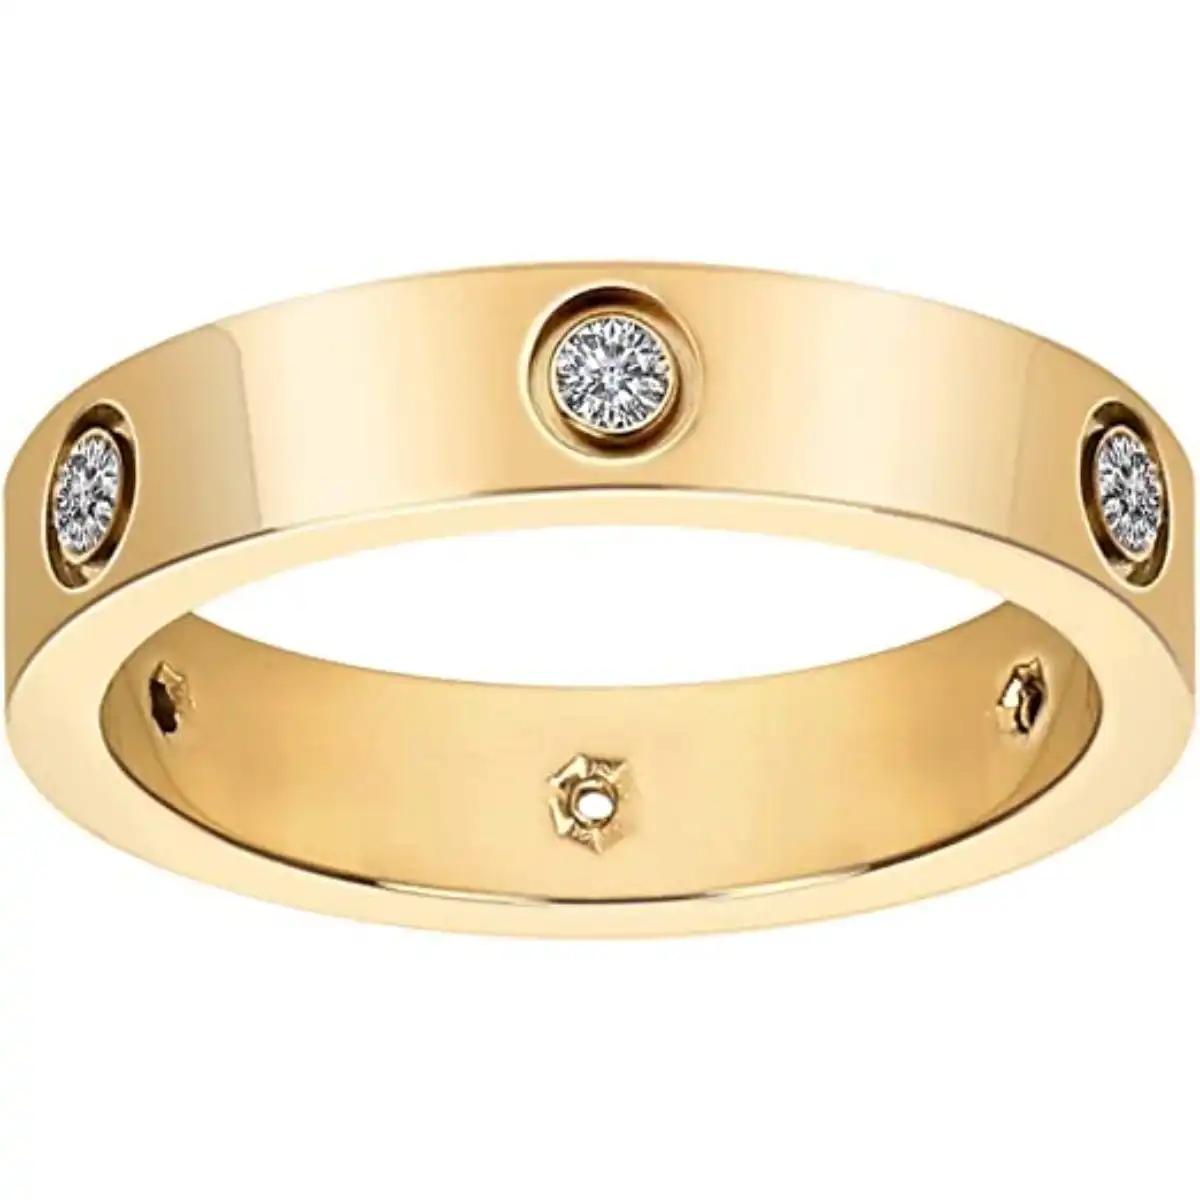 Cartier love ring dupe amazon 1